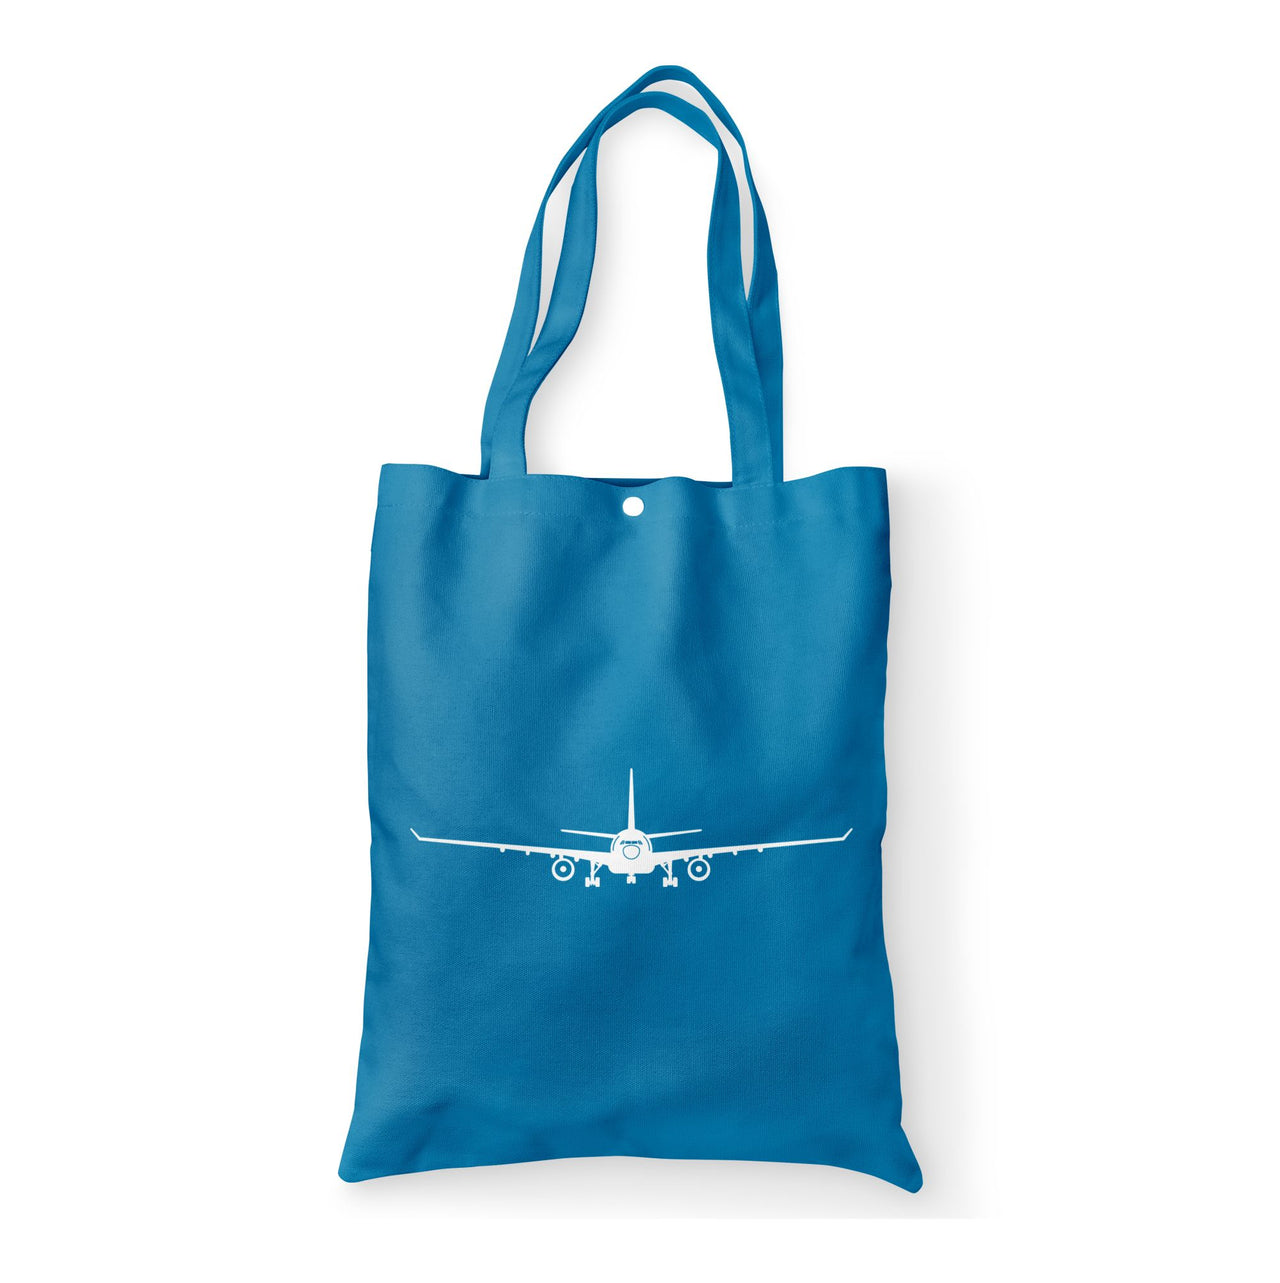 Airbus A330 Silhouette Designed Tote Bags